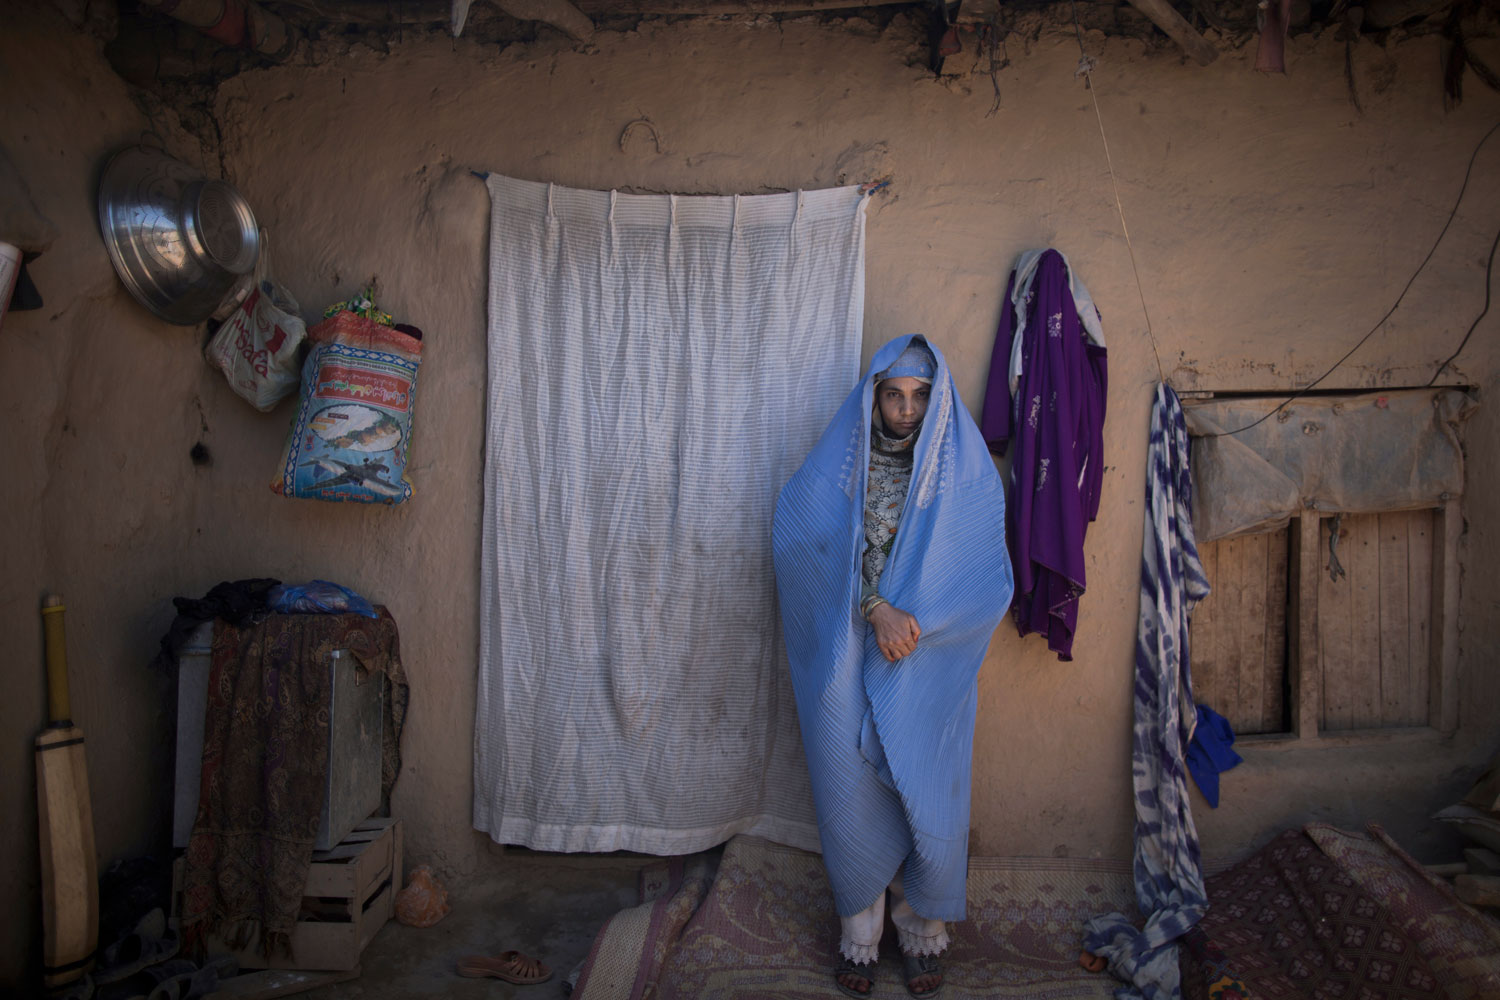 Afghan refugee Yasmina Yawaz, 30, a mother of two children, at her mud house in a slum on the outskirts of Islamabad on March 30, 2014. Yasmina and her husband fled the violence in Jalalabad a year ago, following the death of her brother.